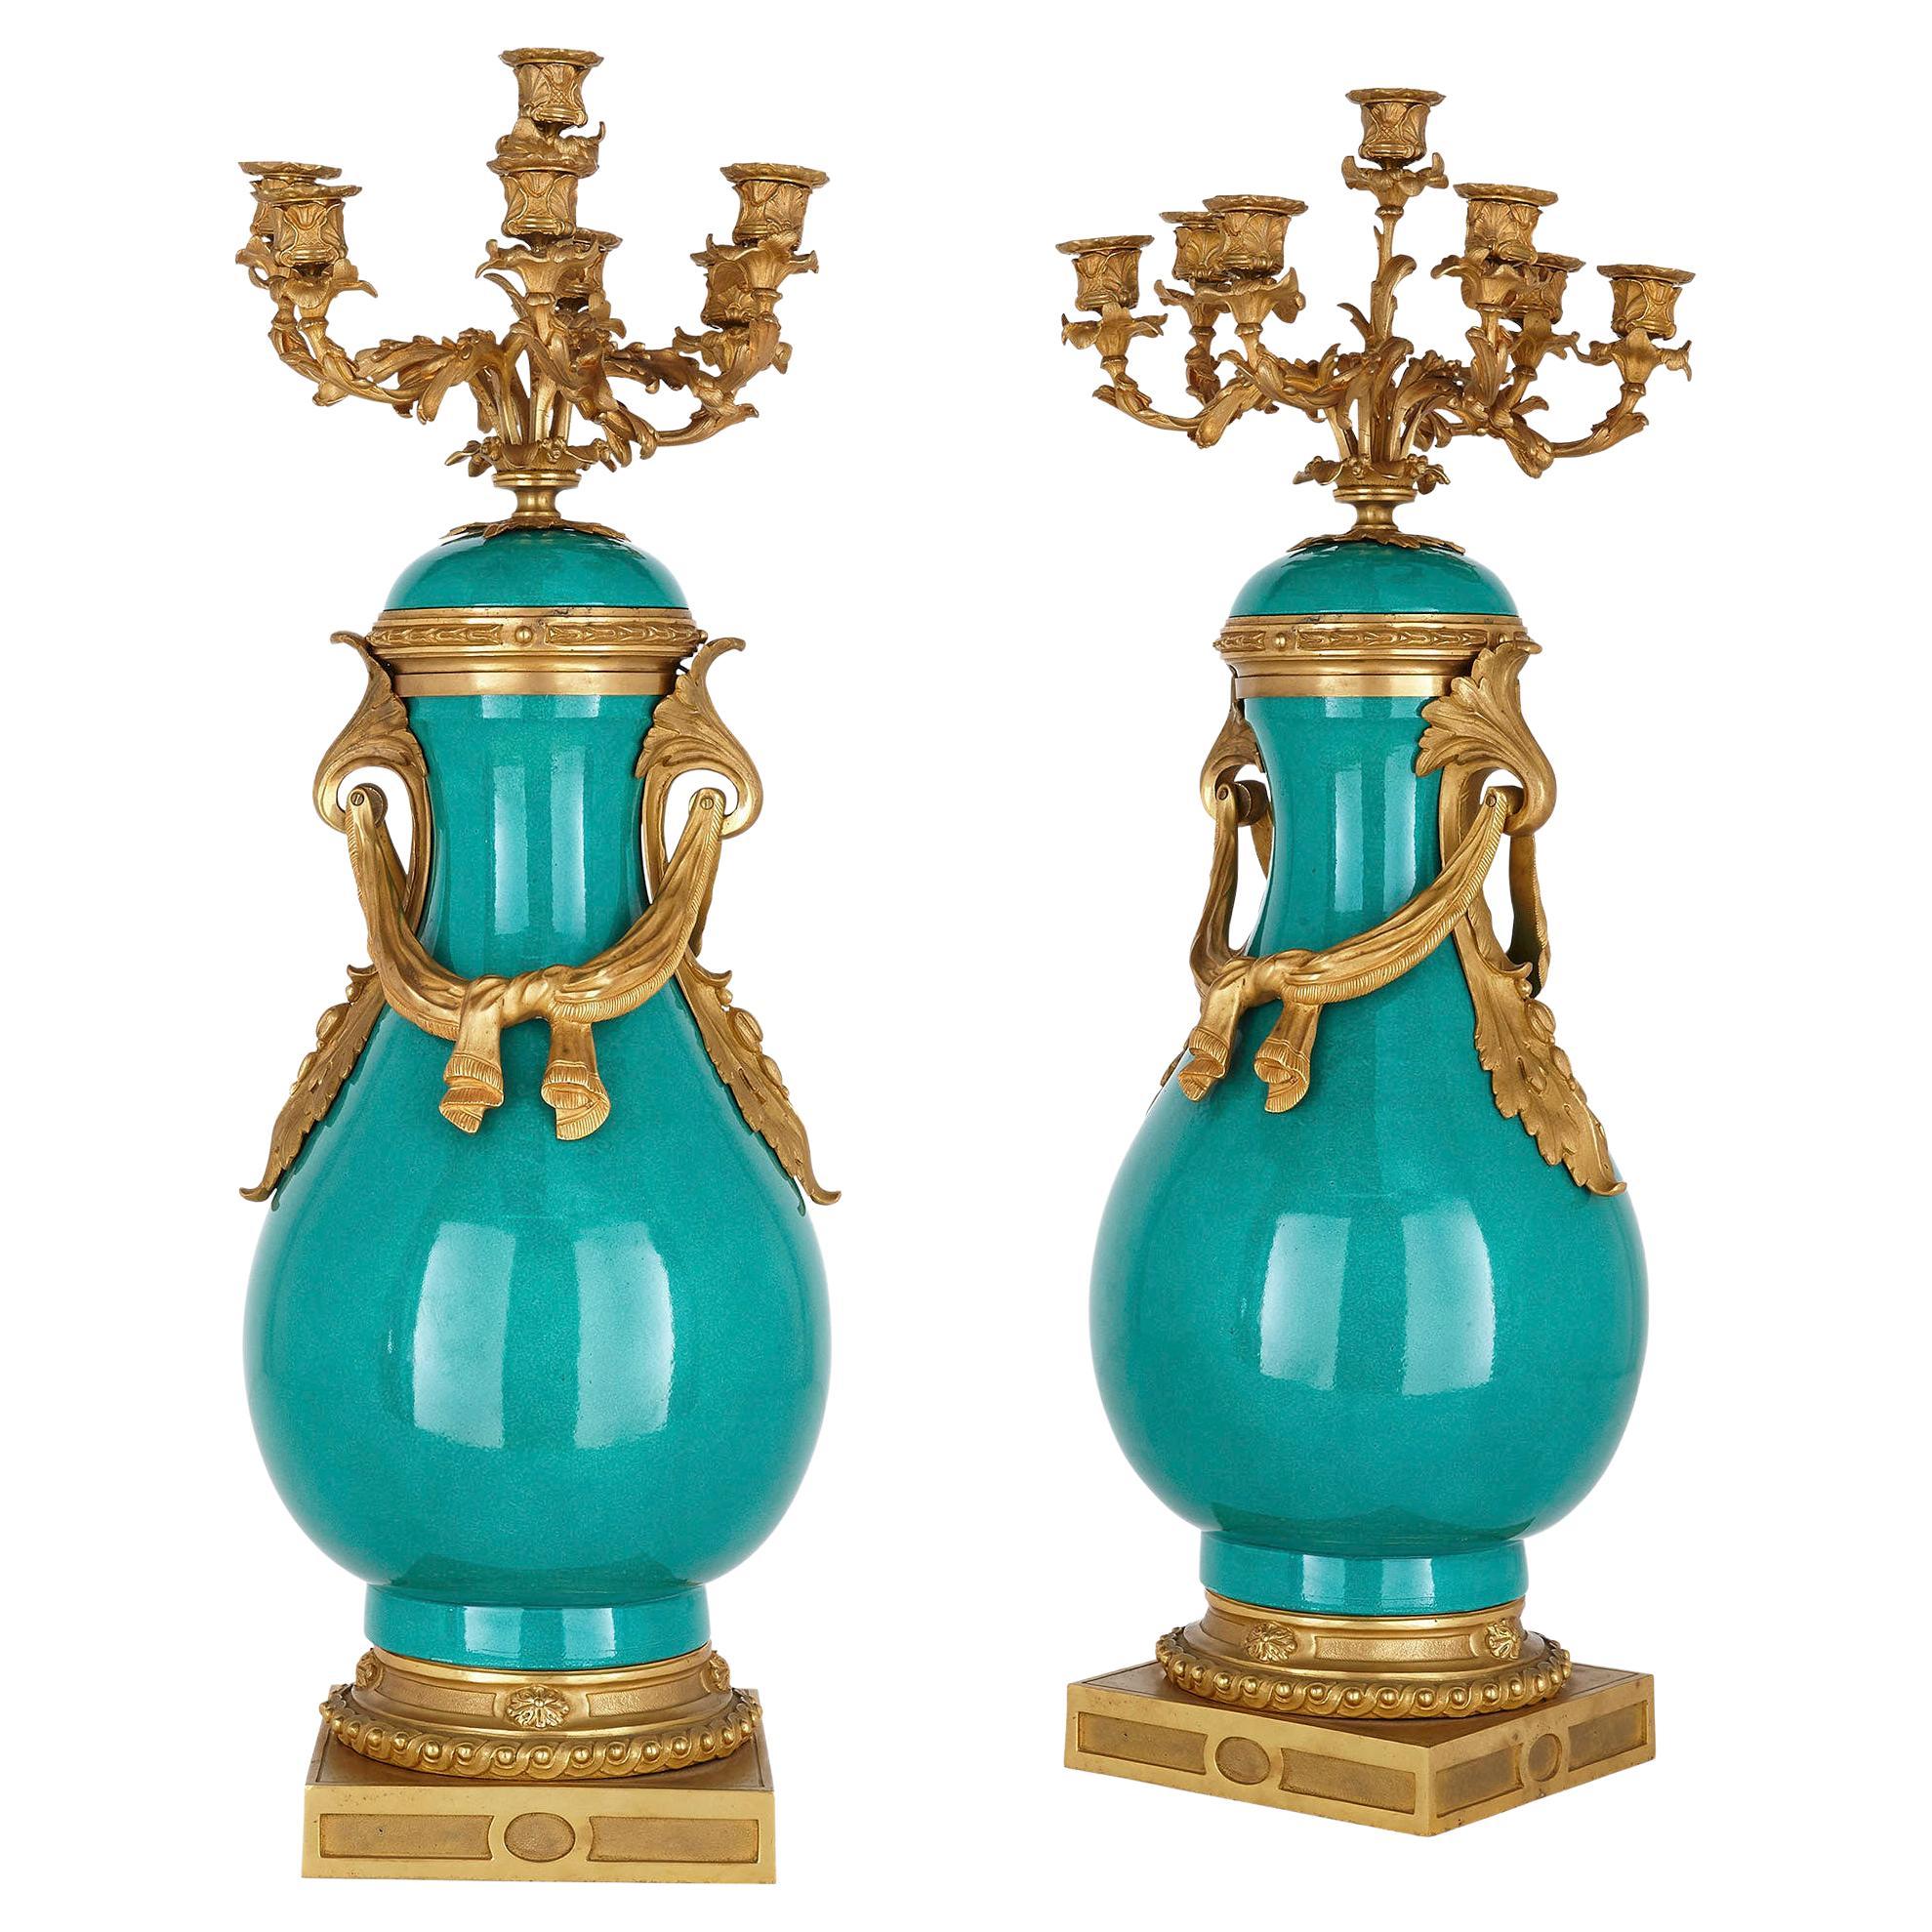 Pair of Gilt Bronze and Turquoise Porcelain Candelabra For Sale